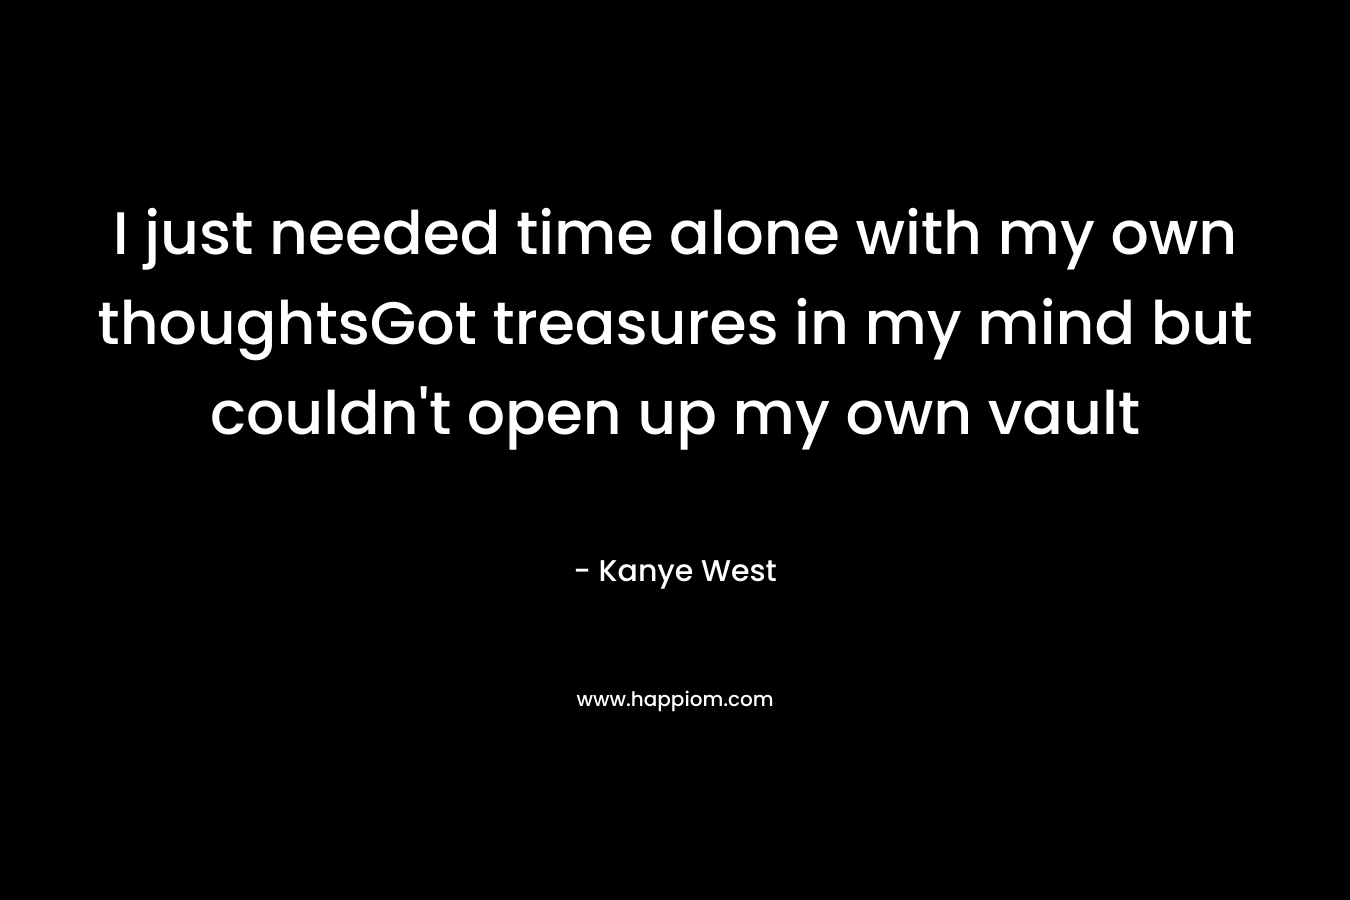 I just needed time alone with my own thoughtsGot treasures in my mind but couldn’t open up my own vault – Kanye West